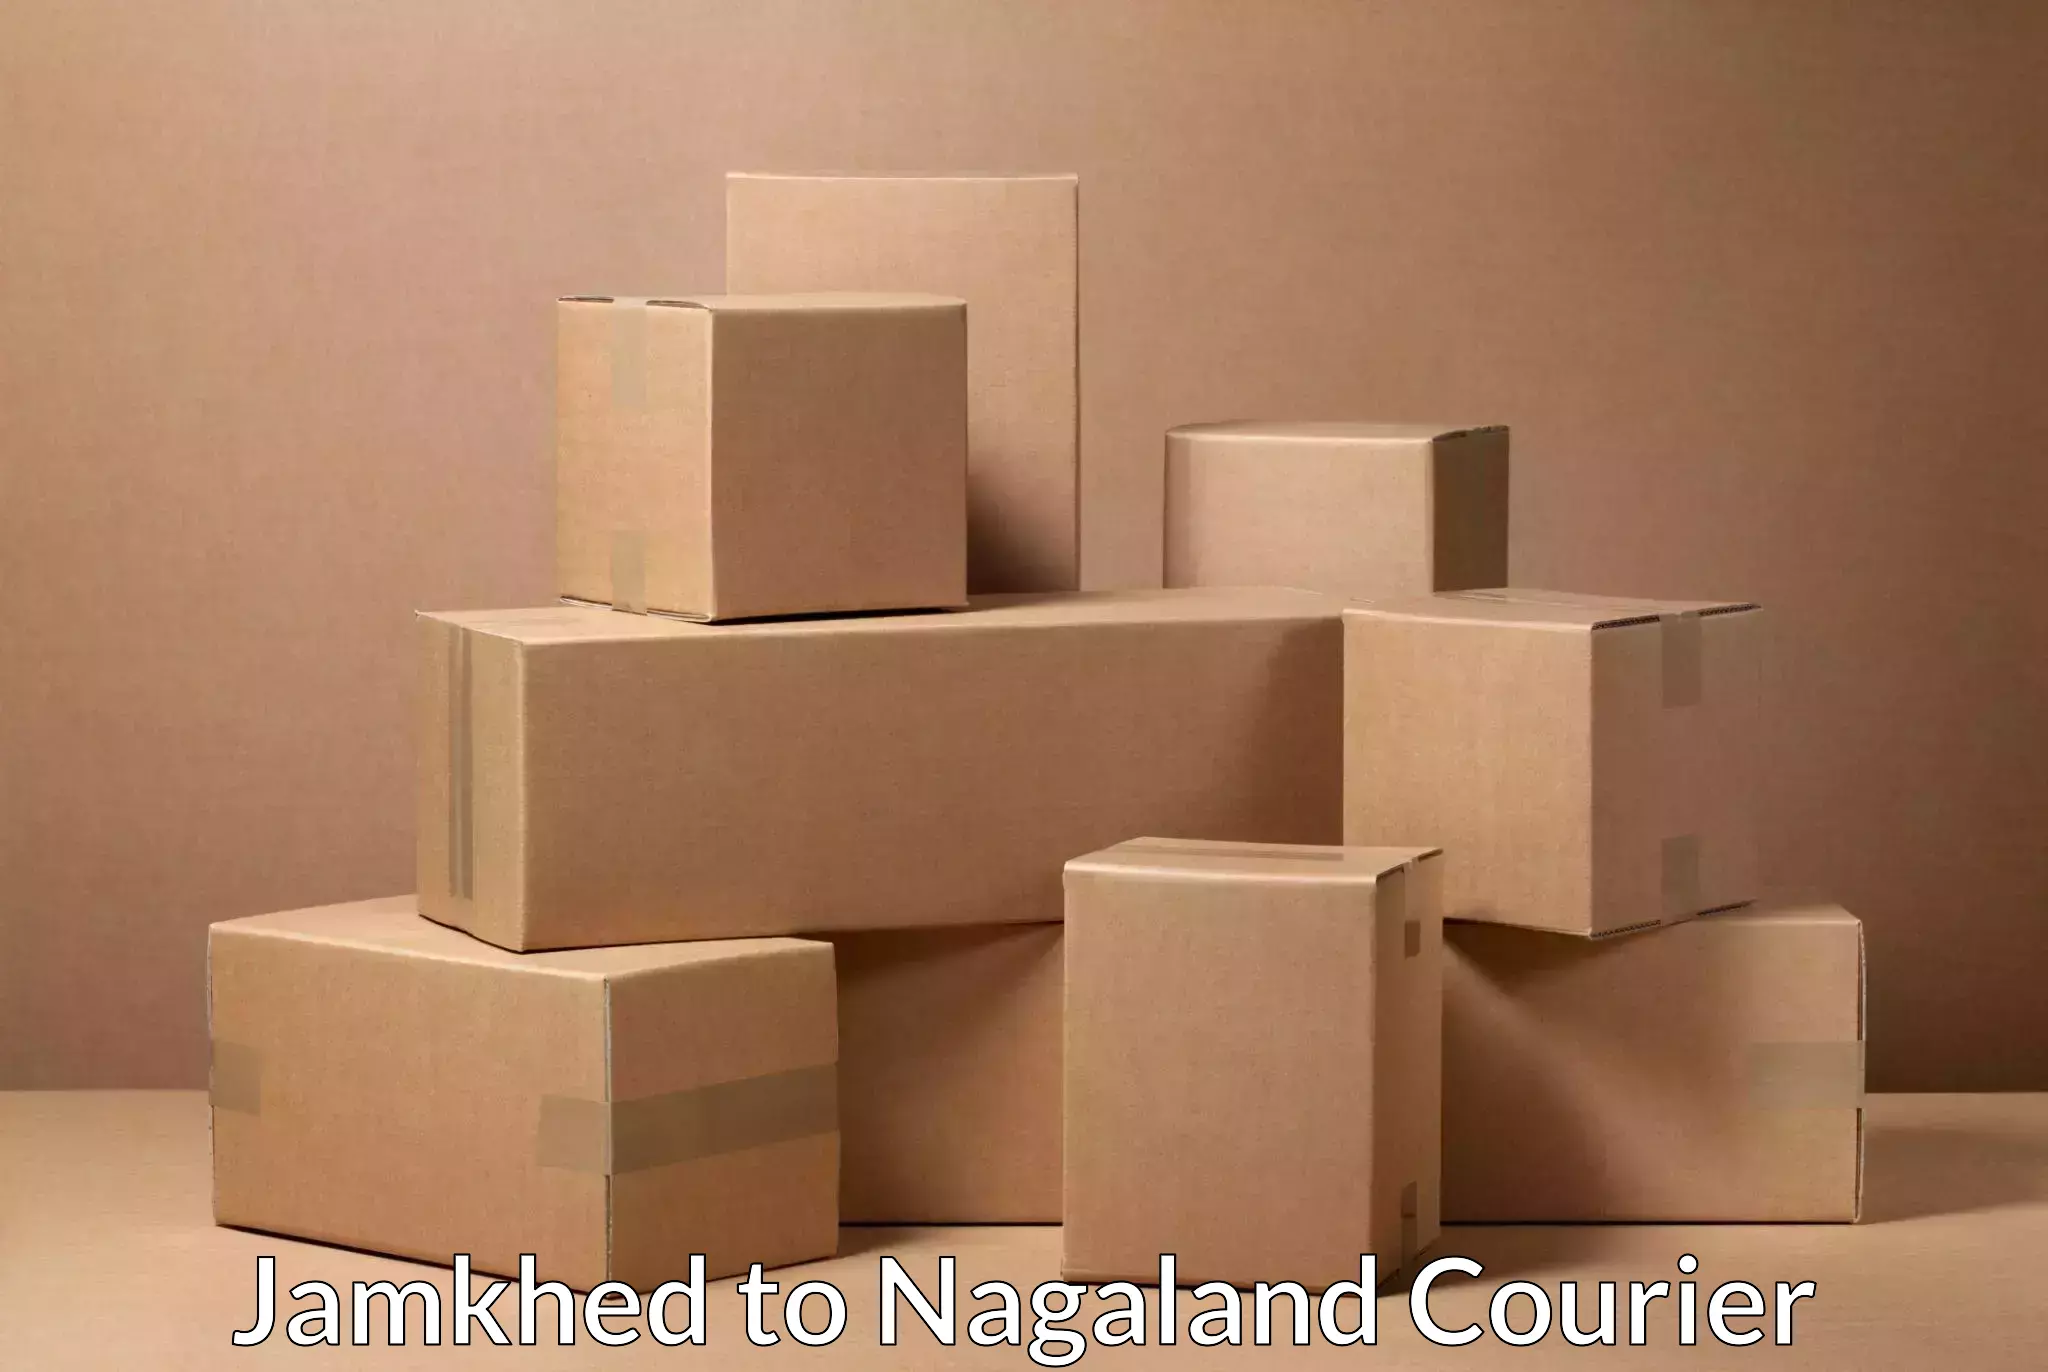 Supply chain delivery Jamkhed to Nagaland